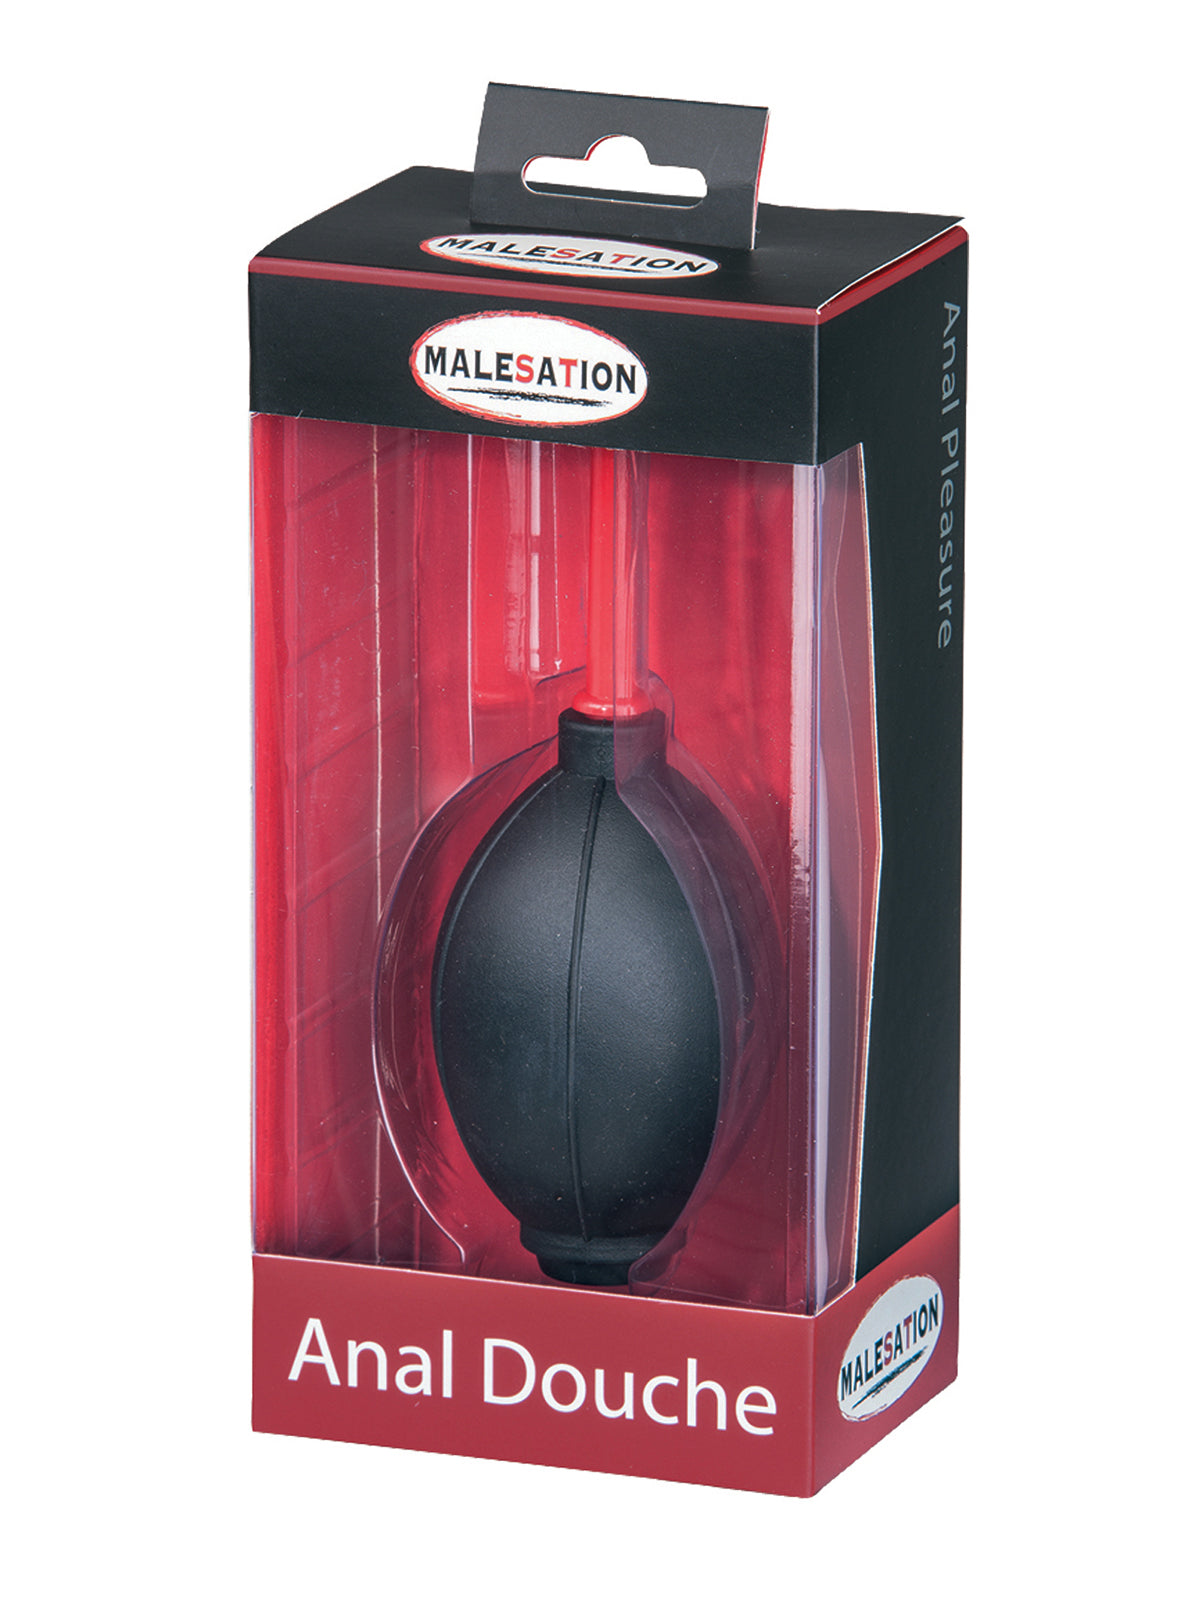 Anal Douche by Malesation